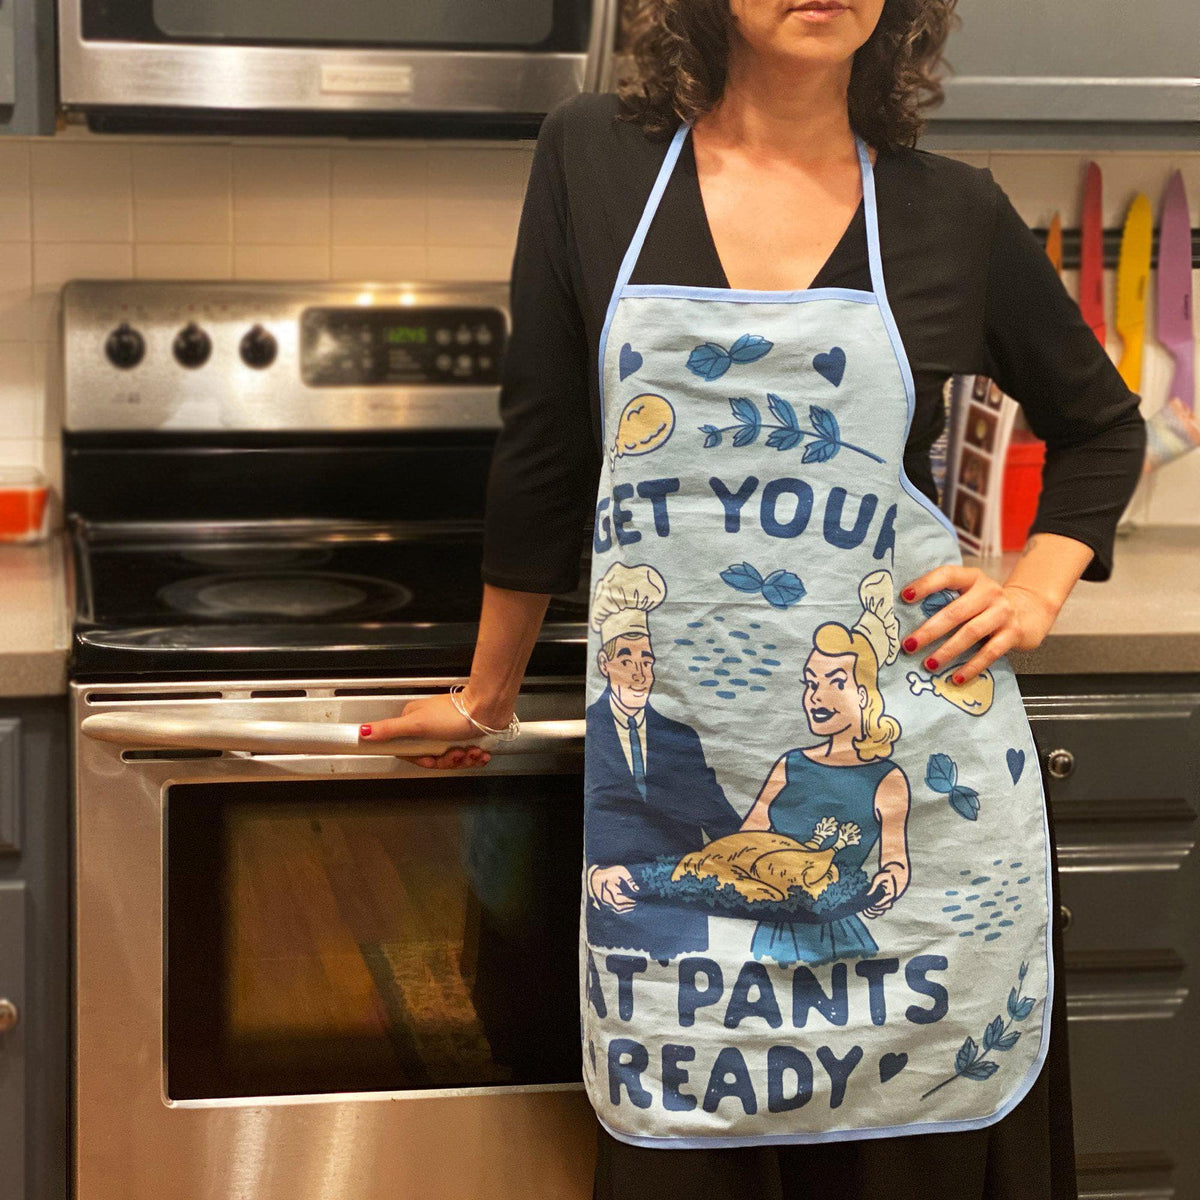 Get Your Fat Pants Ready Oven Mitt + Apron - Crazy Dog T-Shirts